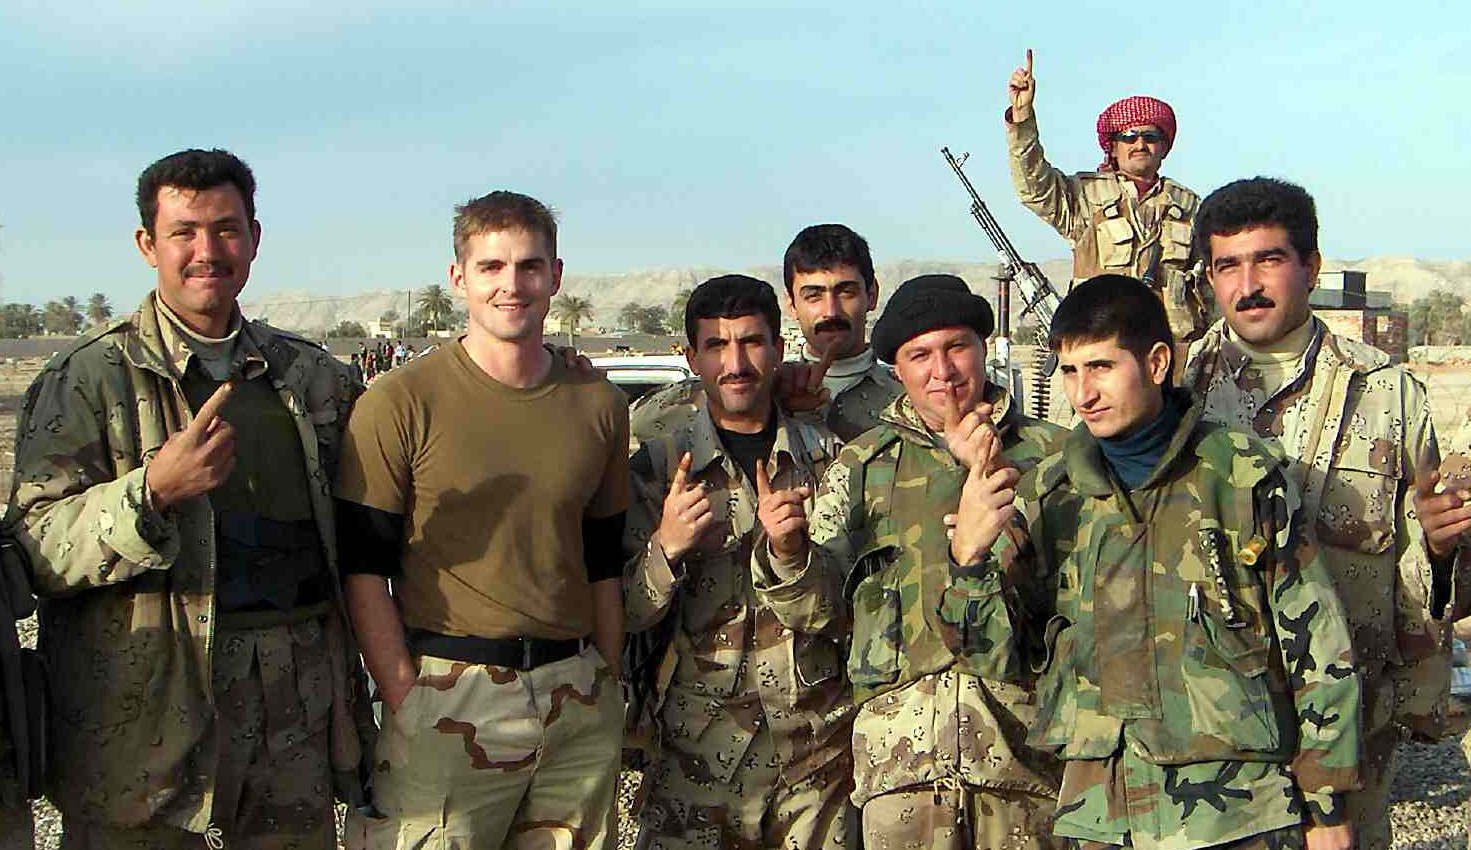 Tommy Sowers (second from left) in Iraq. Photo credit: Panosian32 via Wikimedia Commons.